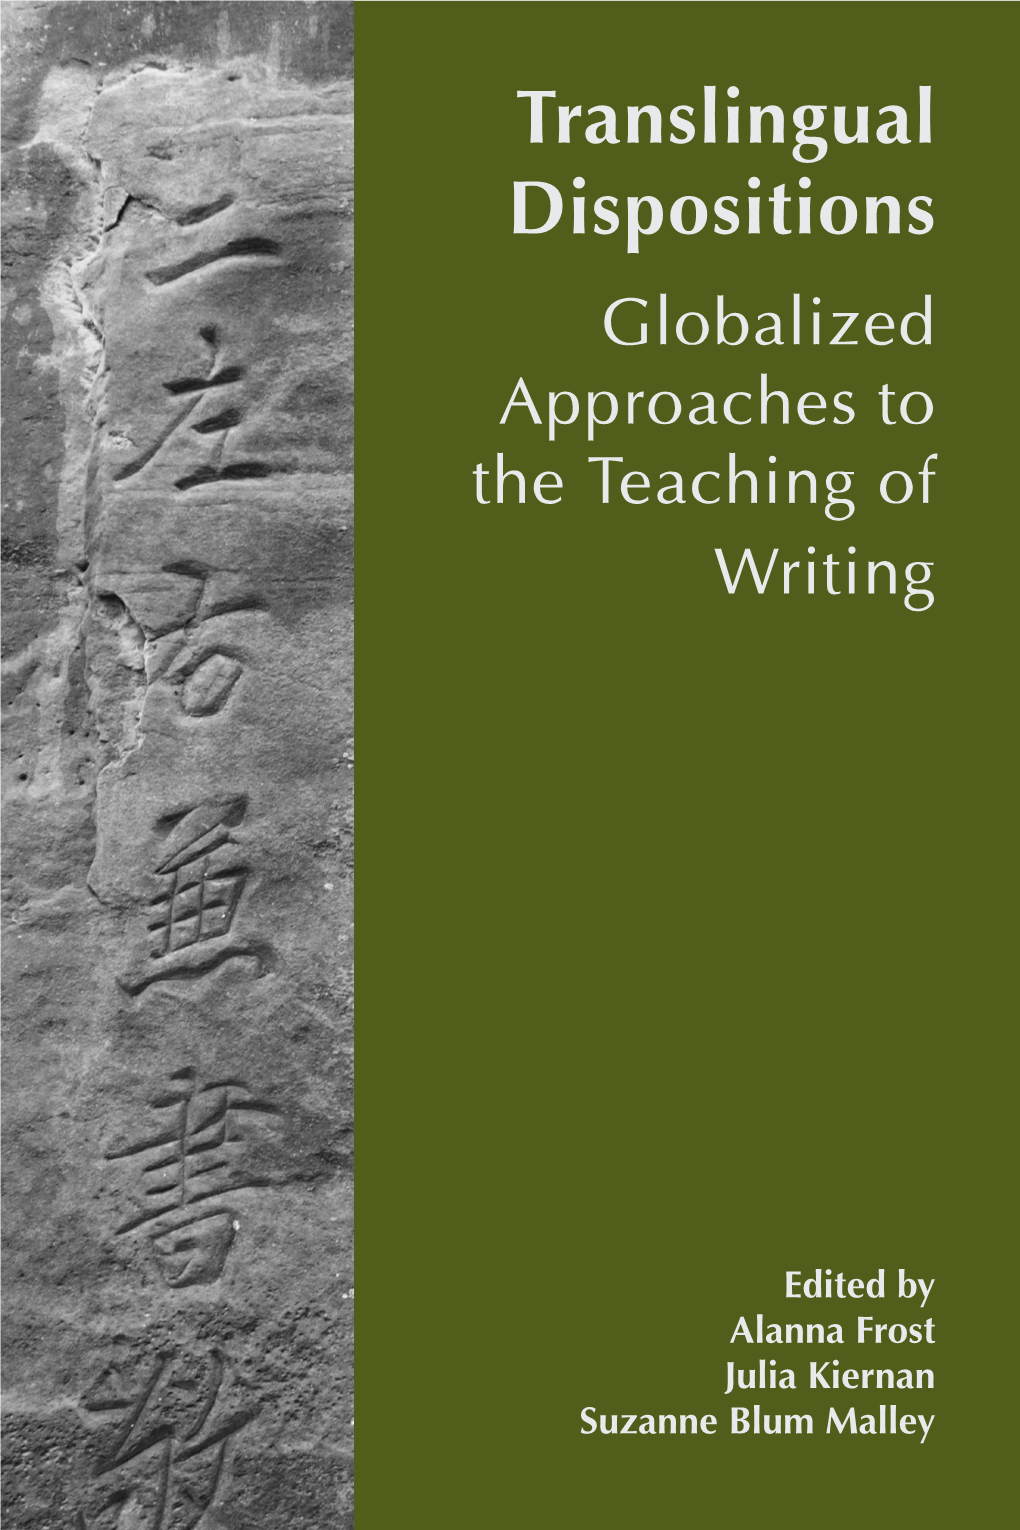 Translingual Dispositions Globalized Approaches to the Teaching of Writing